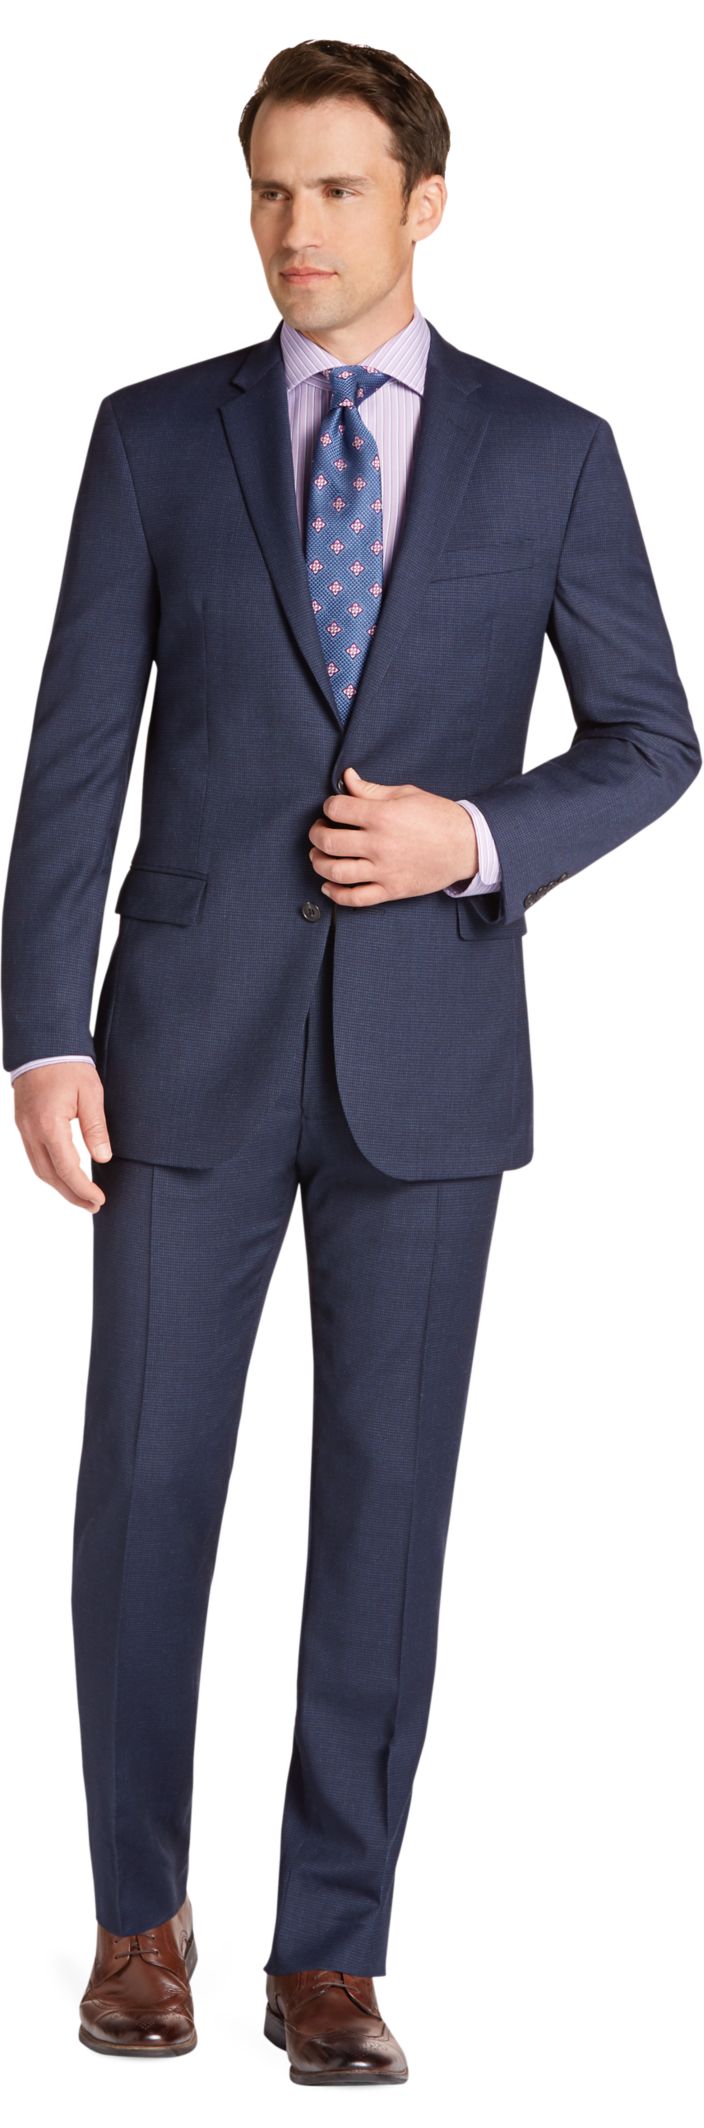 slim fit suit mouse over to zoom cnmiovl